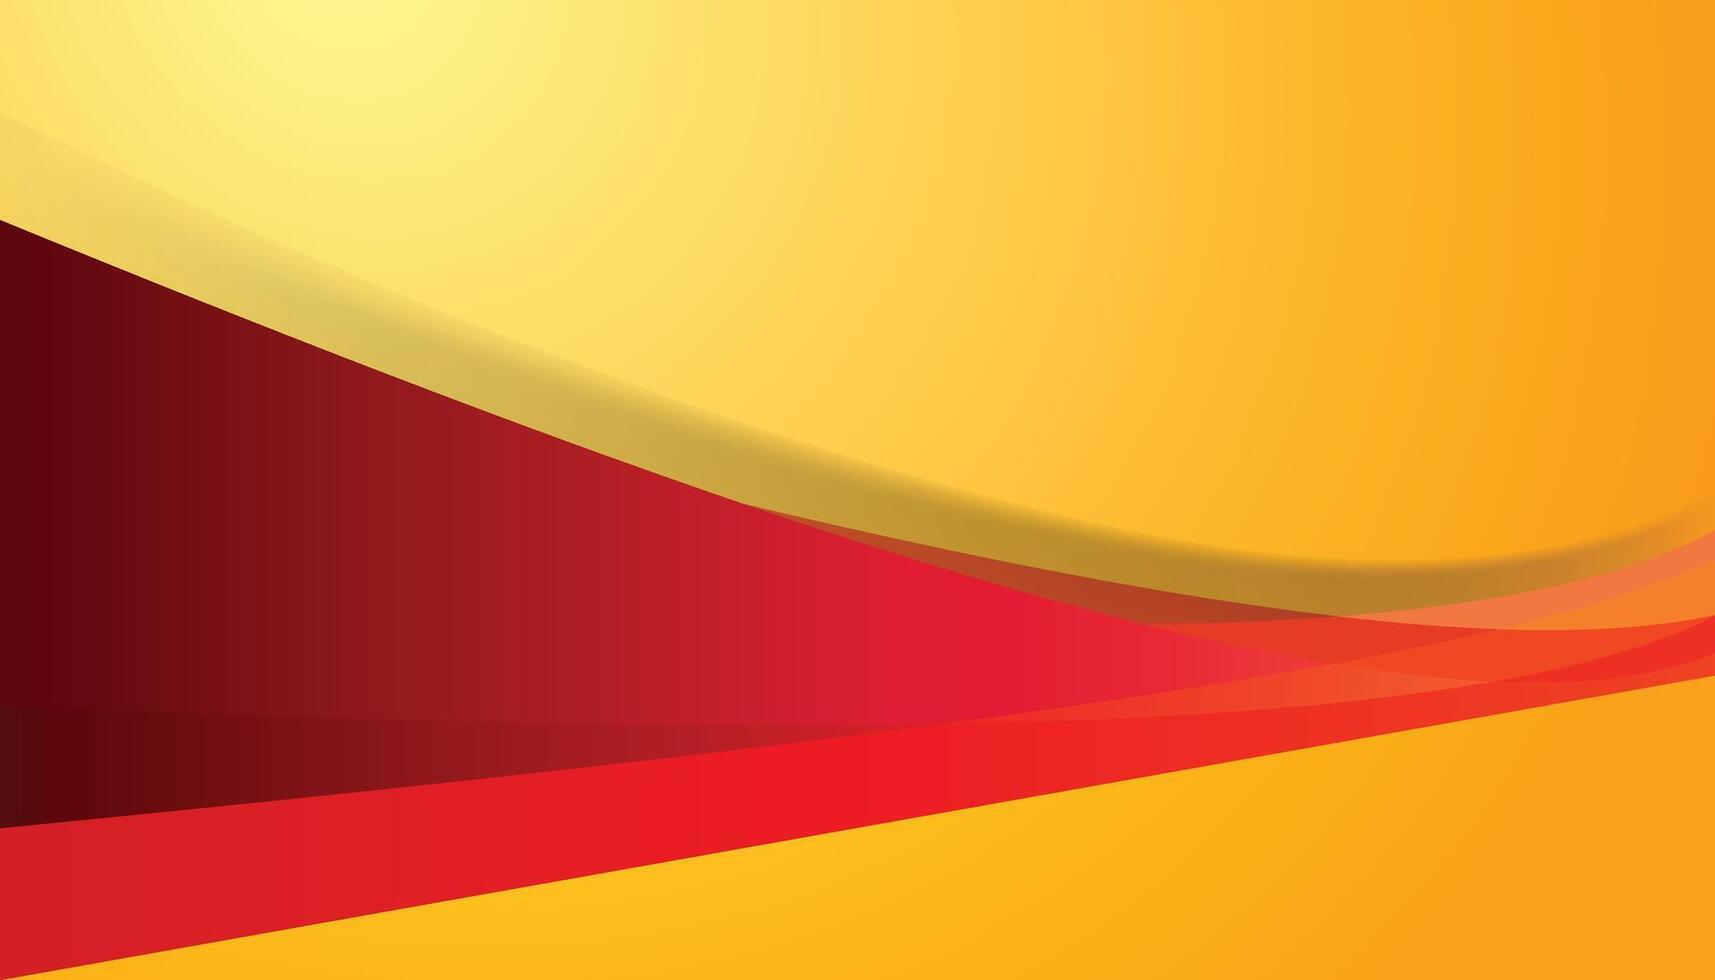 Red Yellow Images, photo, hd wallpaper Vector download